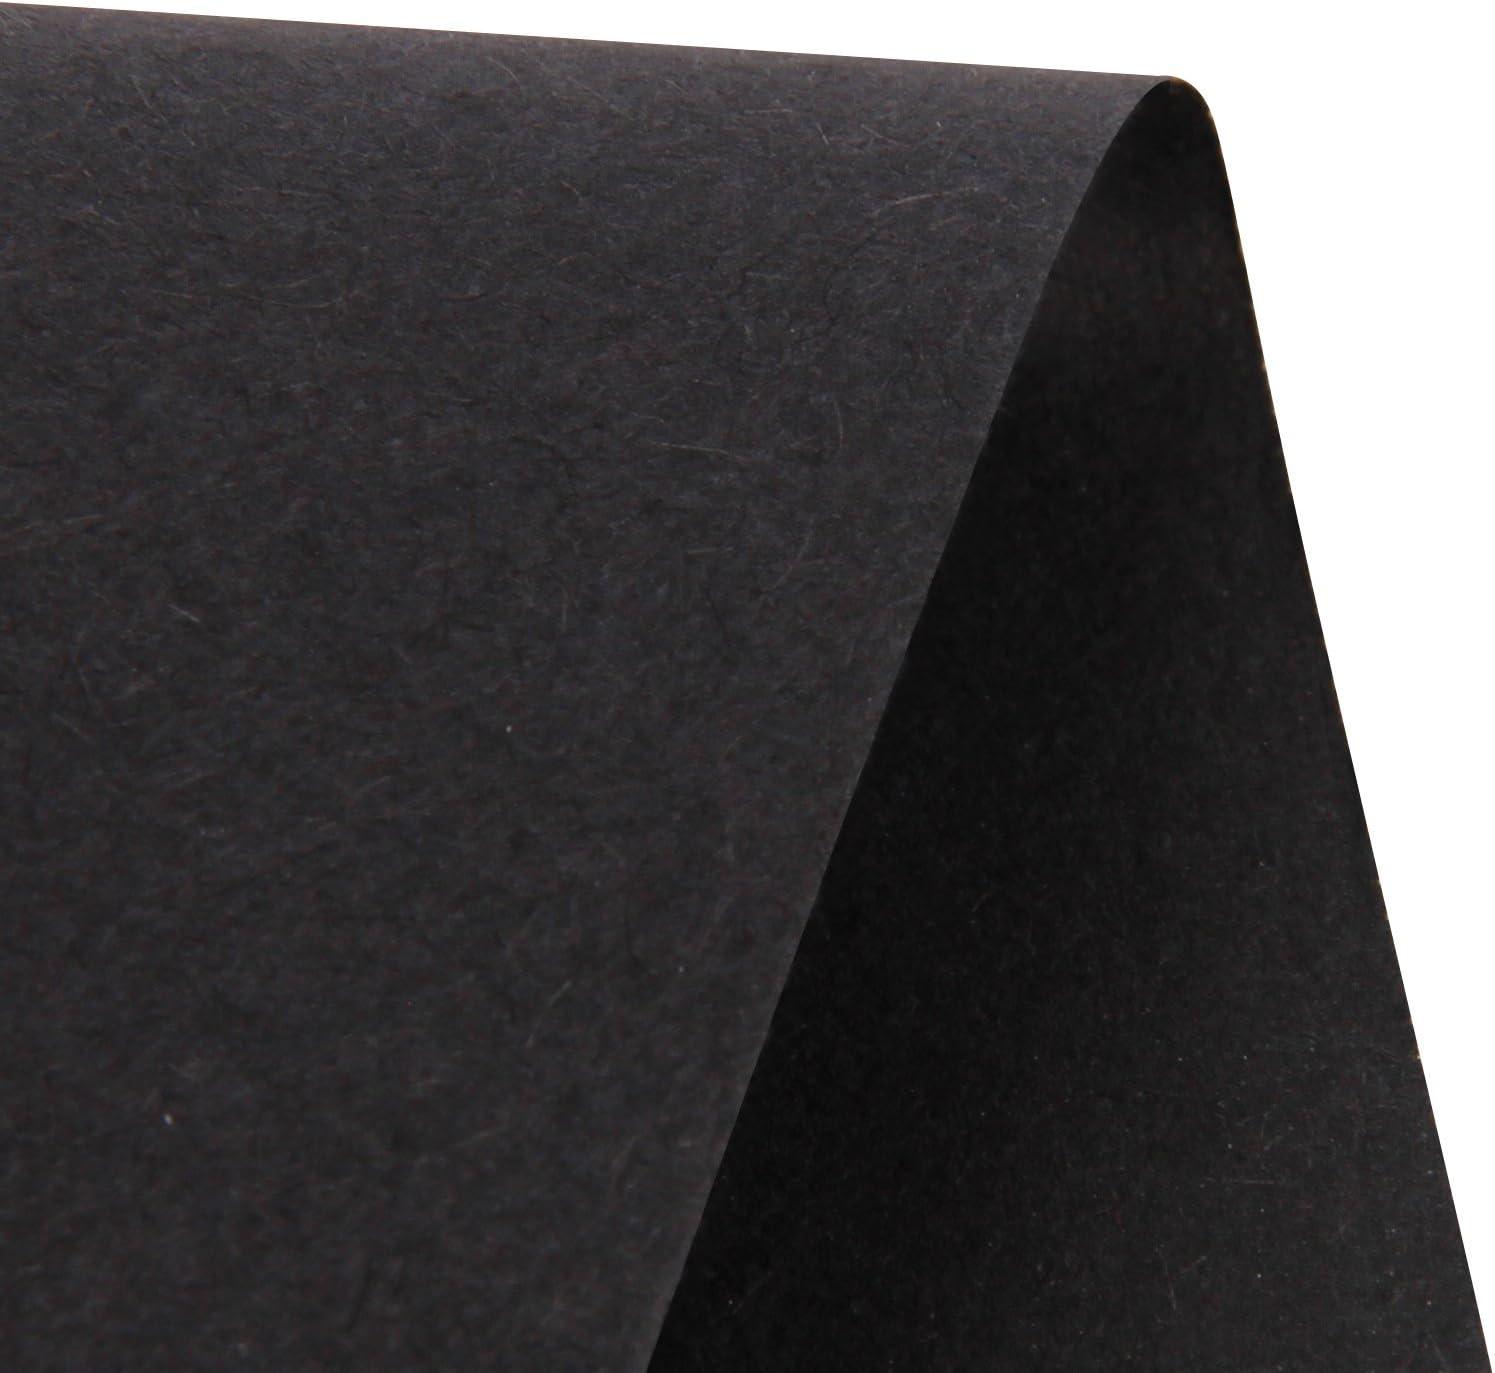 RUSPEPA Black Kraft Paper Roll - 12 inches x 100 feet - Recyclable Paper  Perfect for for Crafts, Art,Small Wrapping, Packing, Postal, Shipping